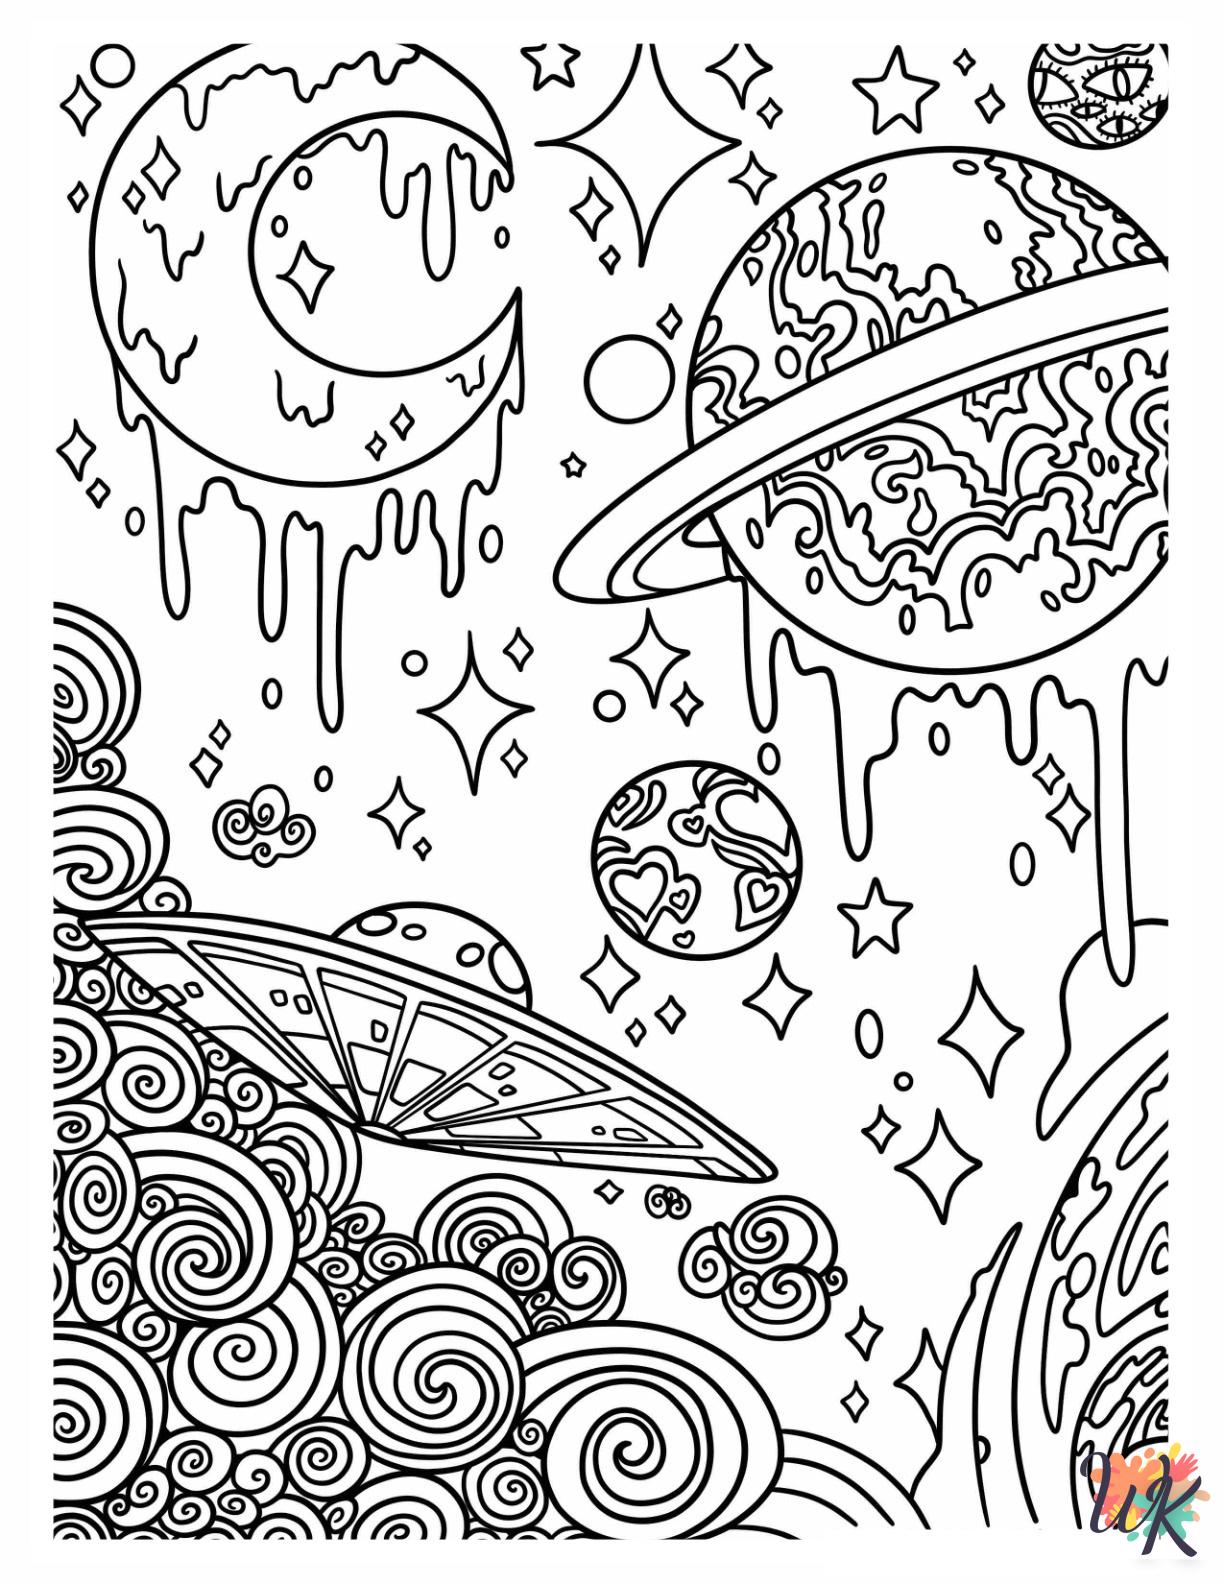 Aesthetic coloring pages for adults 1